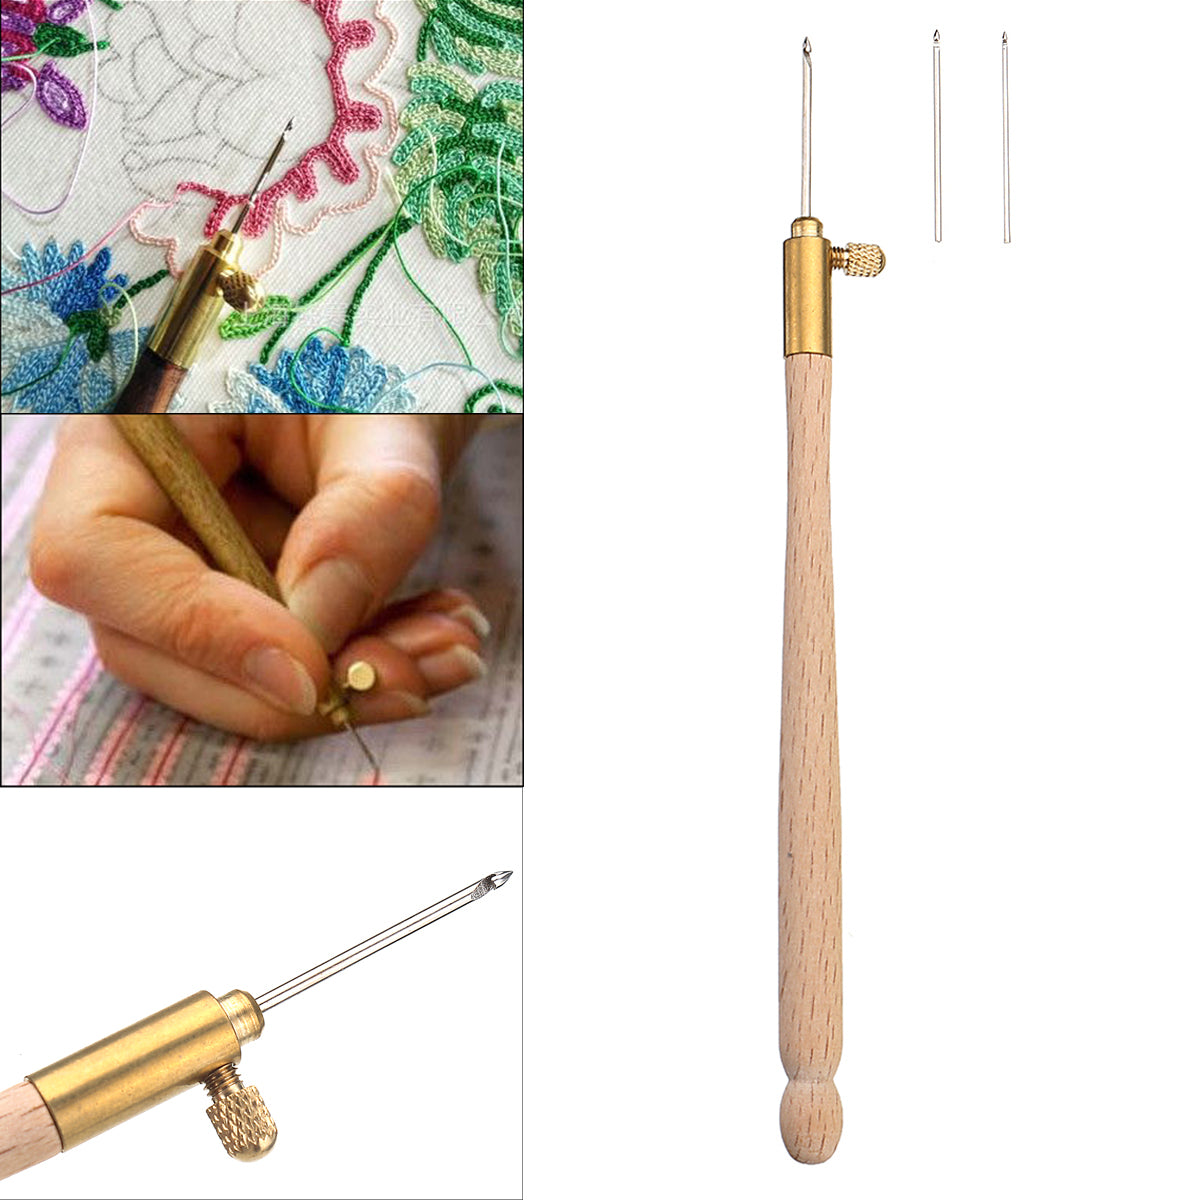  Tool Kit Tambour Hook with 3 Needles 70 90-100 Embroidery  Beading Crochet Set Getting Started with Tambour Embroidery (Haute Couture  Embroidery Series),Tambour Hook Needles Tools Sequins Bead Neddle